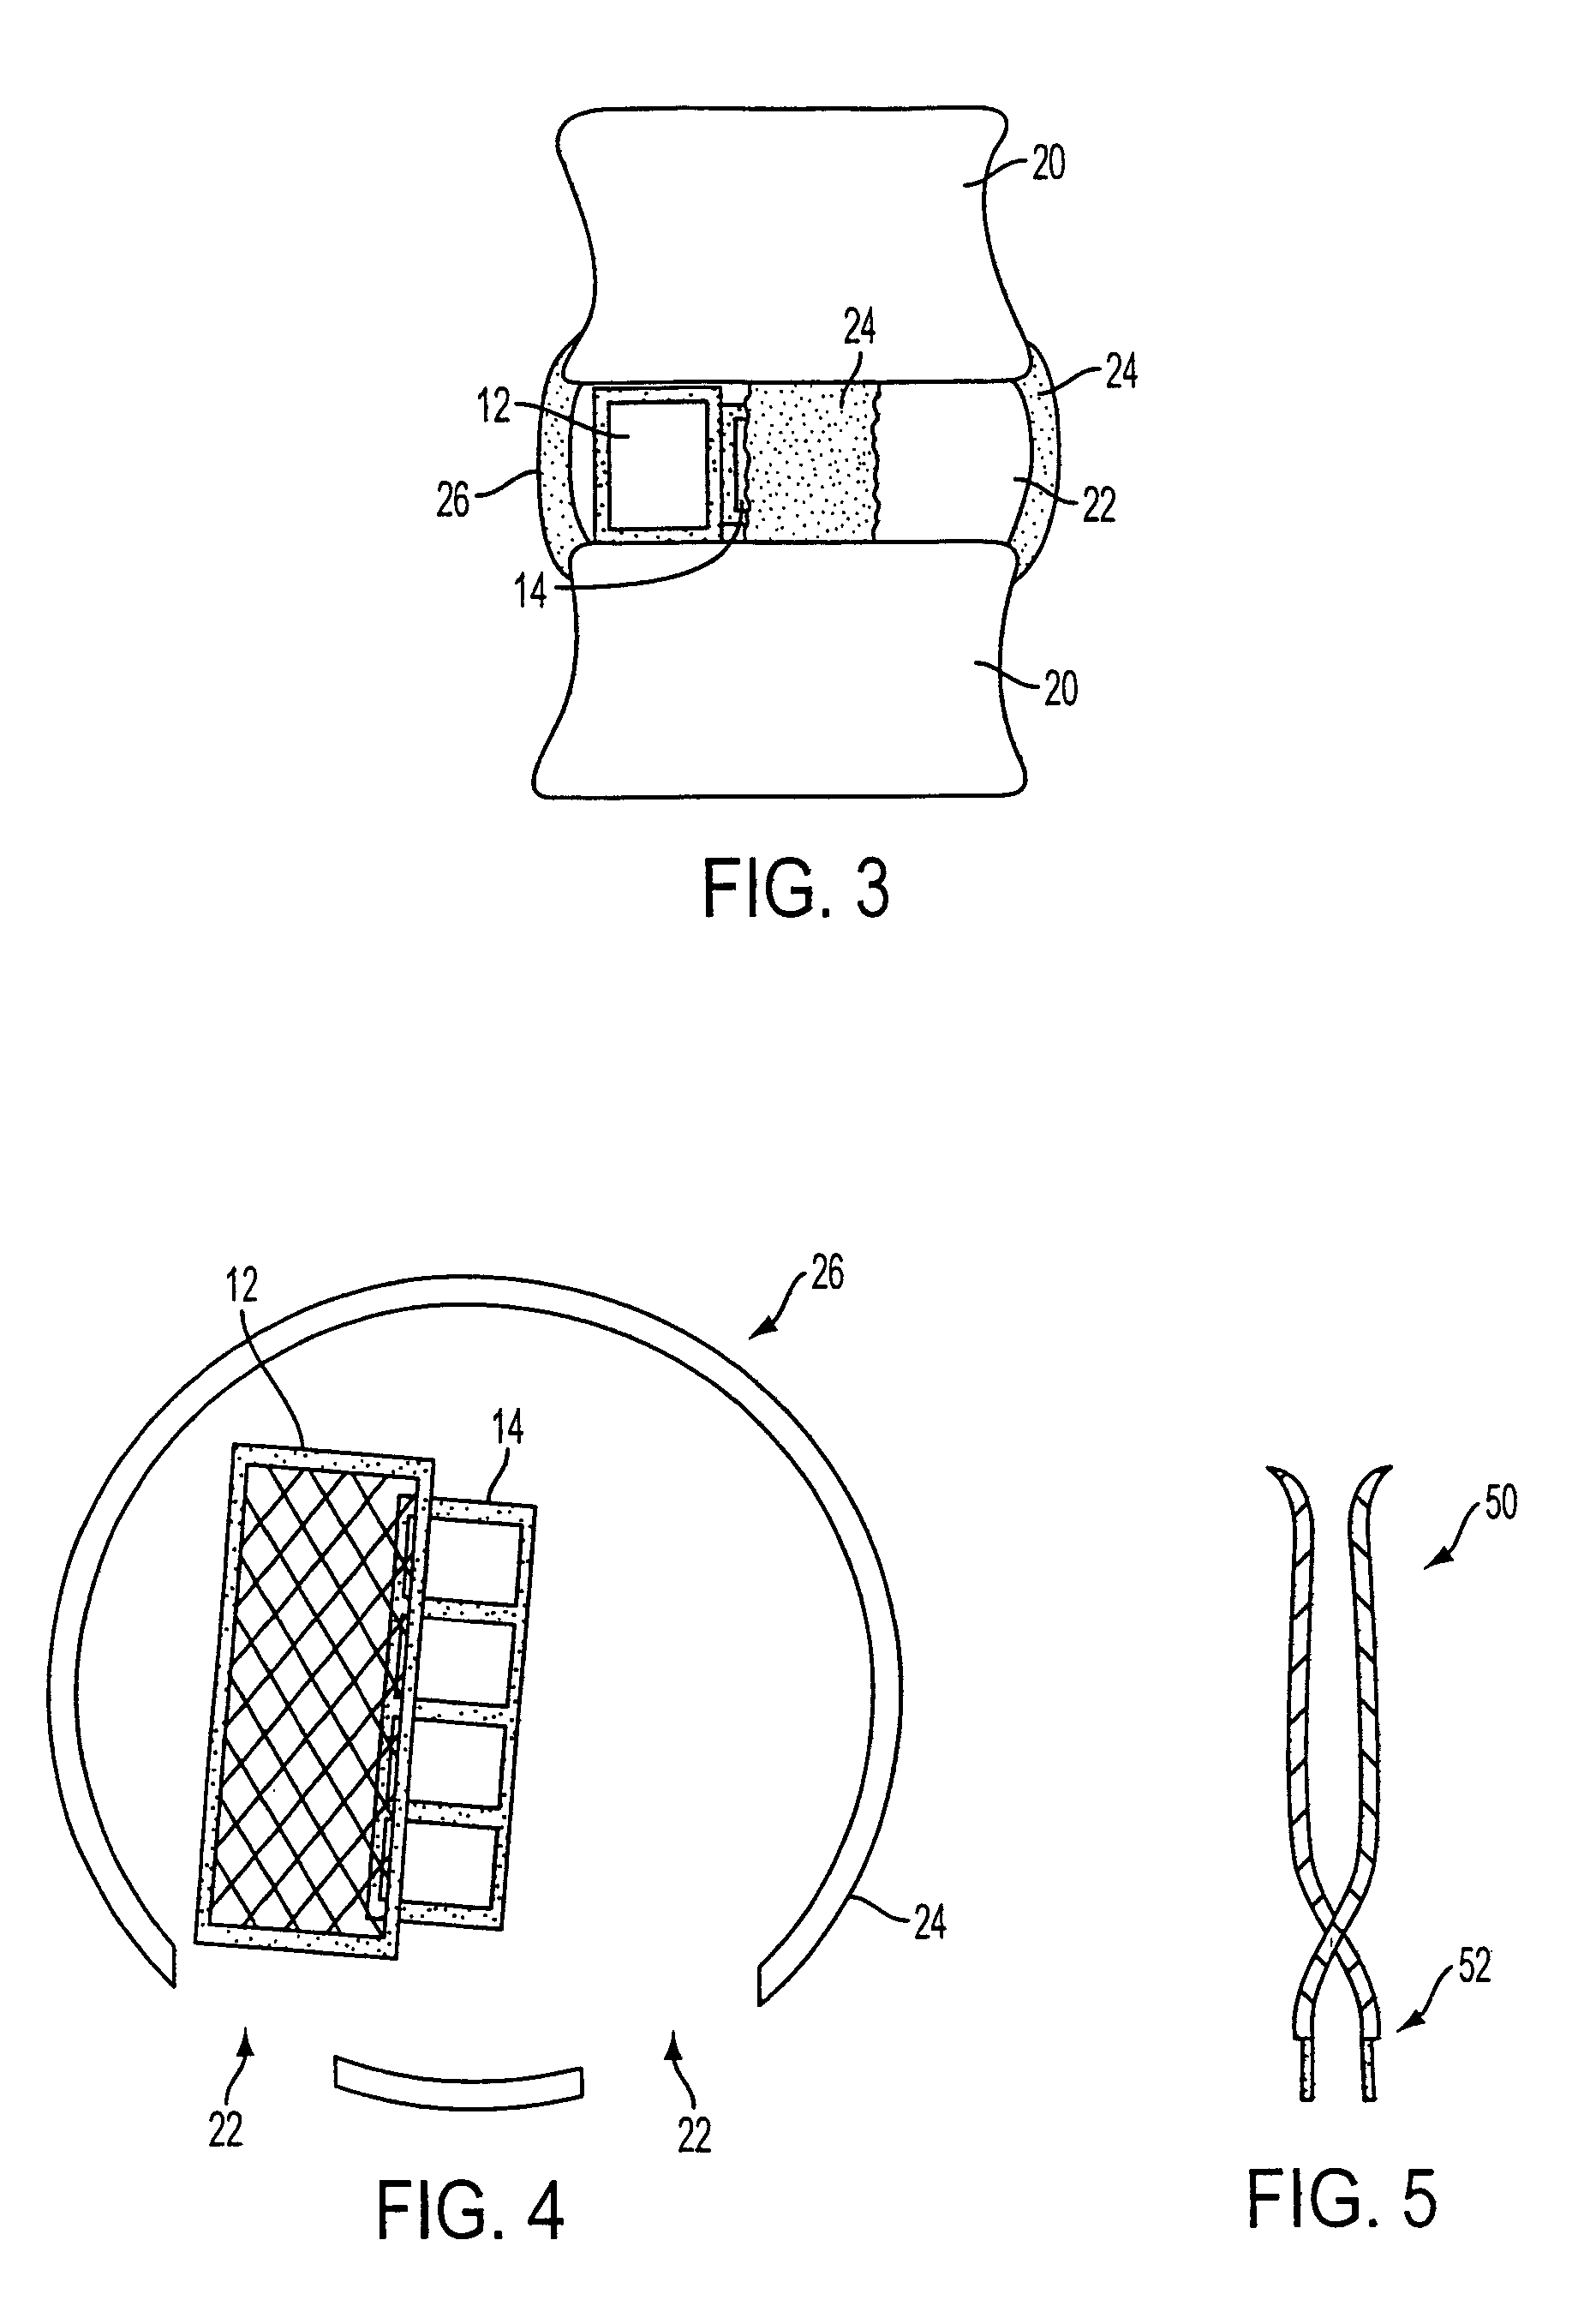 Lateral expandable interbody fusion cage